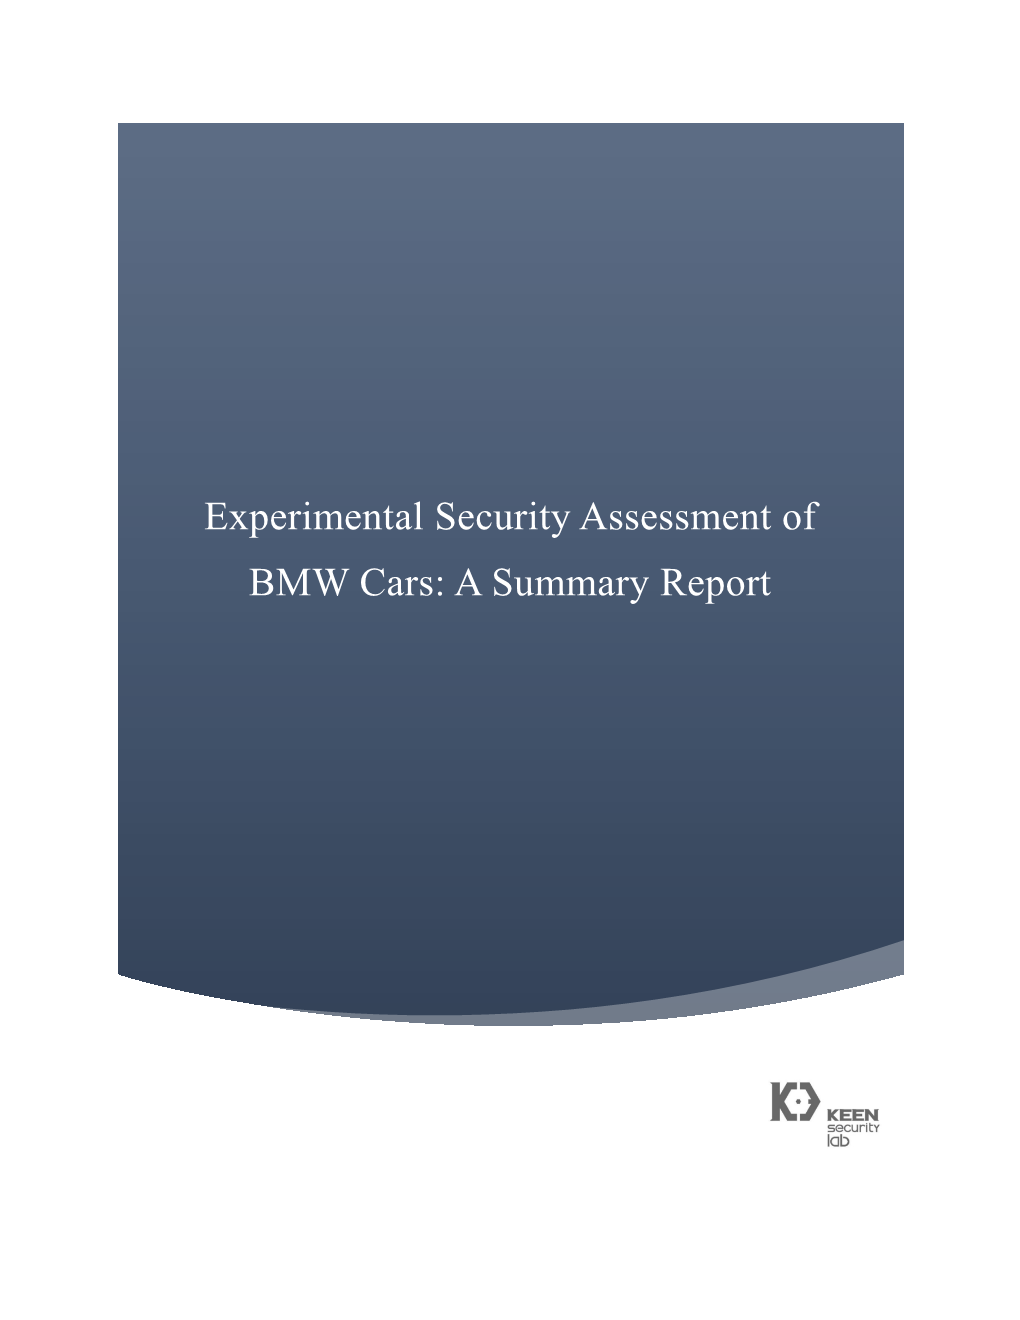 Experimental Security Assessment of BMW Cars: a Summary Report Are Reserved and Soley Owned by Keen Security Lab (Tencent Technology (Shanghai) Co., Ltd.)